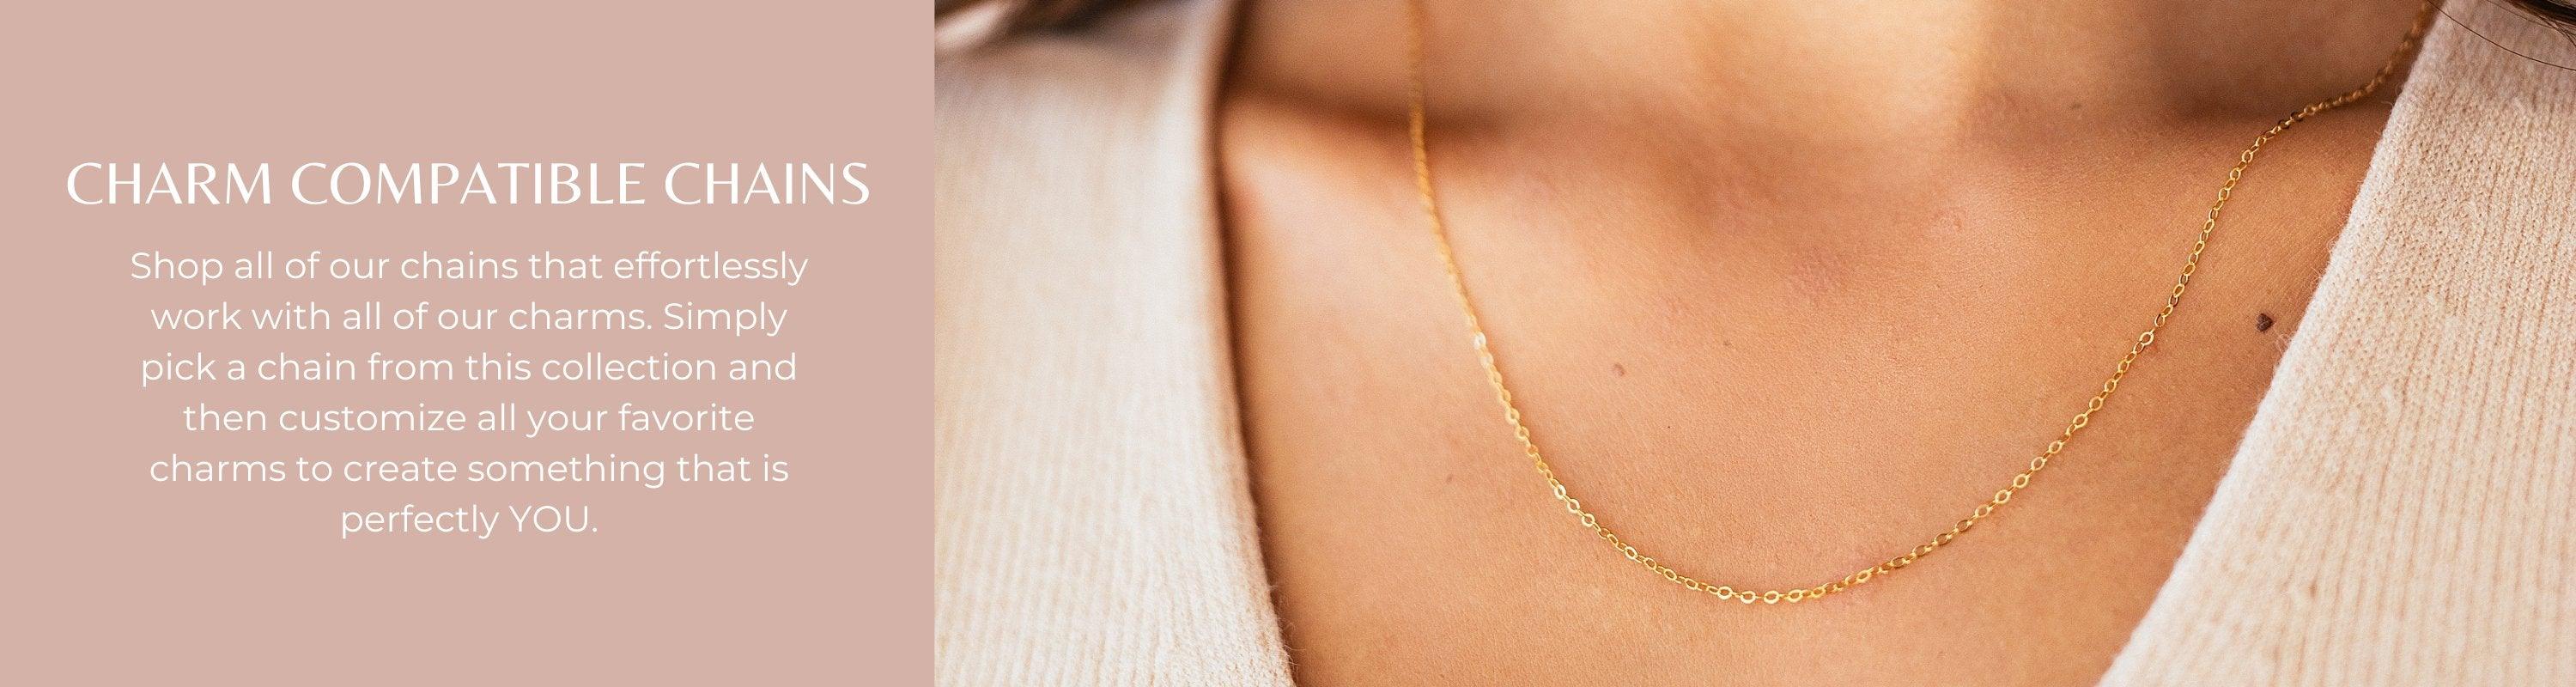 Charm Compatible Chains - Nolia Jewelry - Meaningful + Sustainably Handcrafted Jewelry